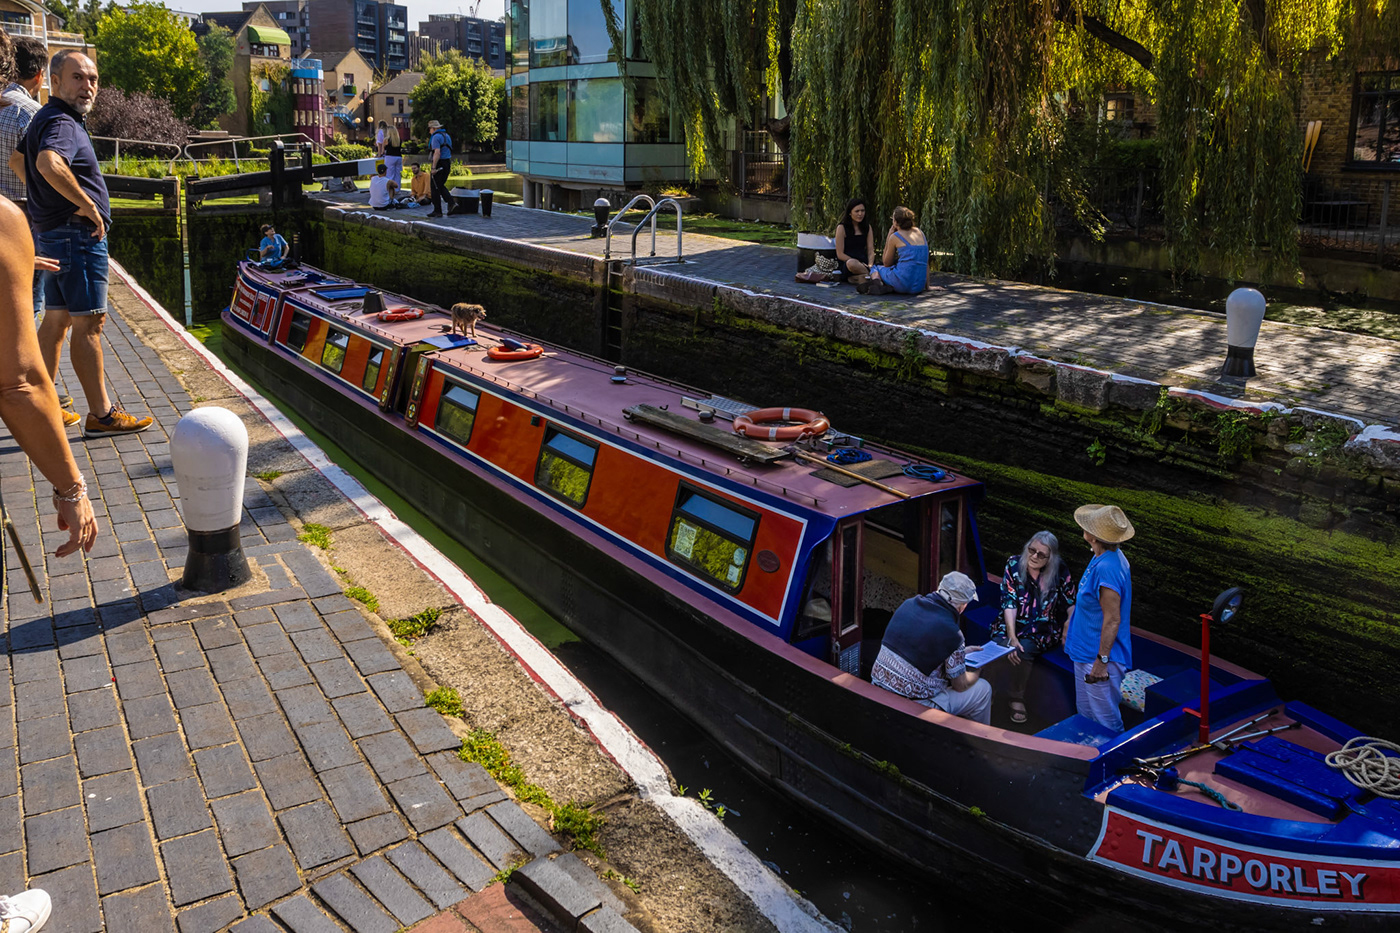 Shane Aurousseau Photography  London travel photography narrowboat canal Boats Canalside Waterways & Canals waterways of Britain